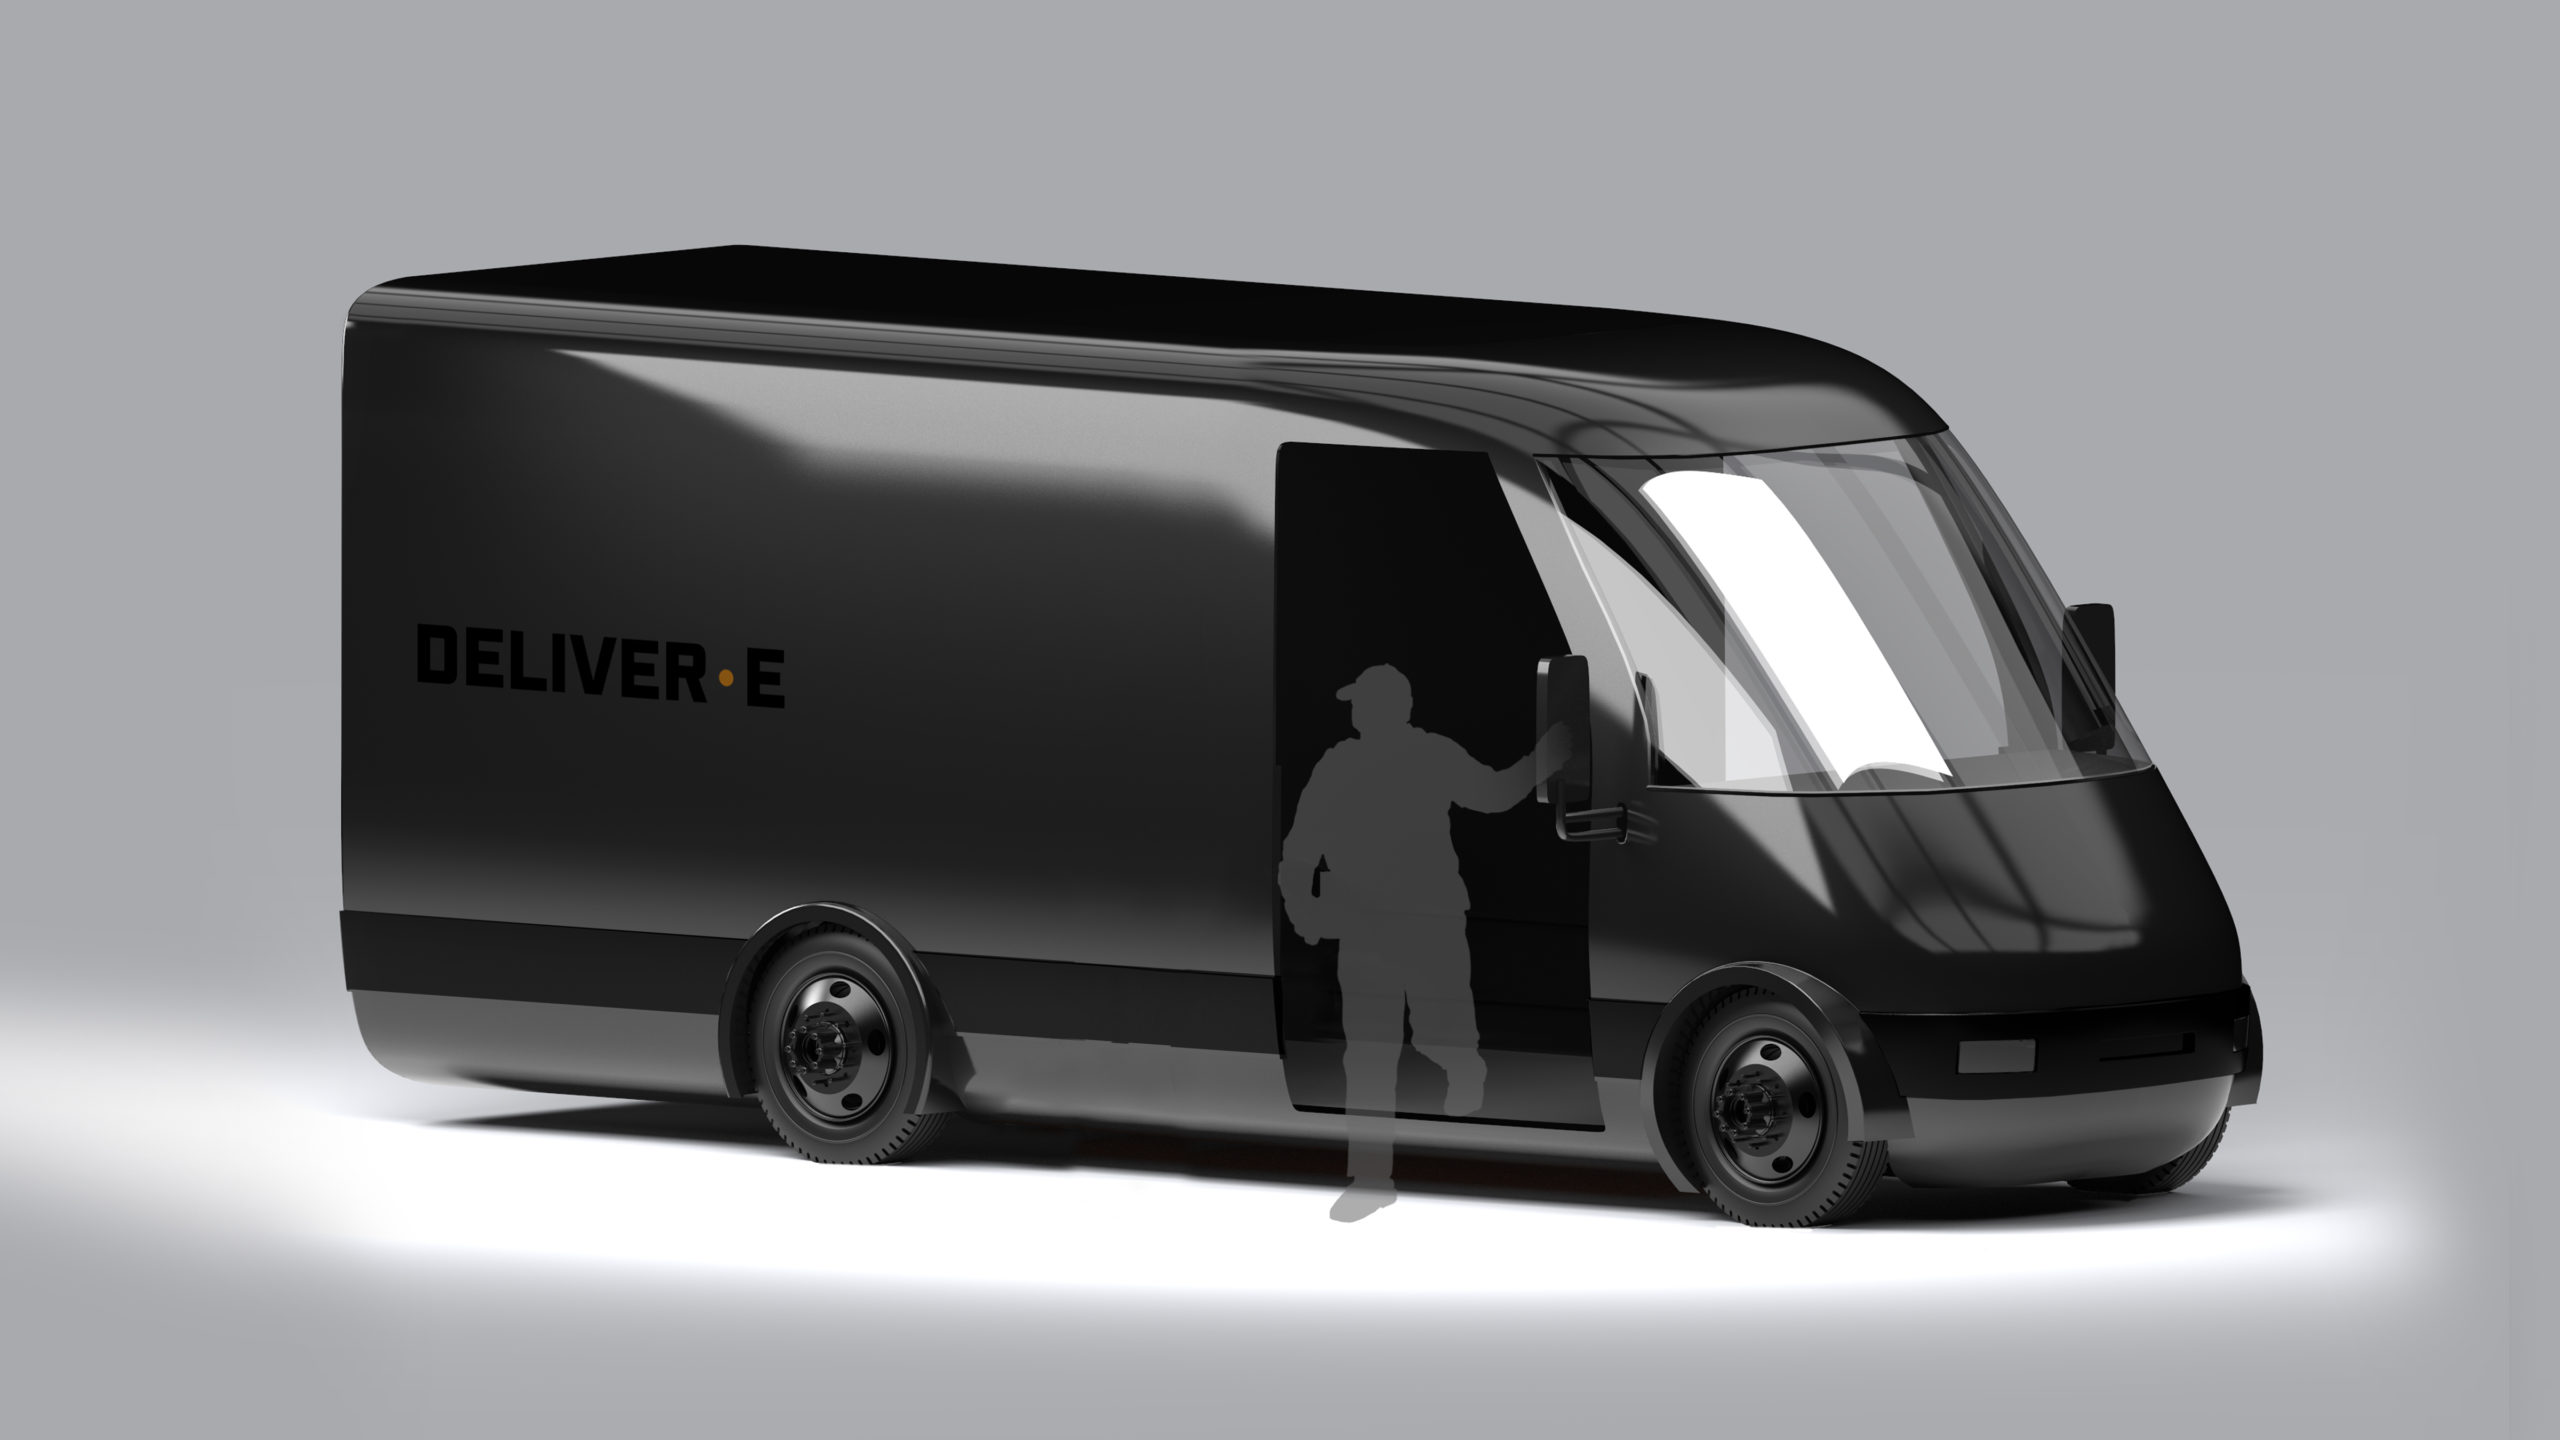 Bollinger’s Slick New Electric Van Has A Massive Greenhouse And Gets Five Battery Options